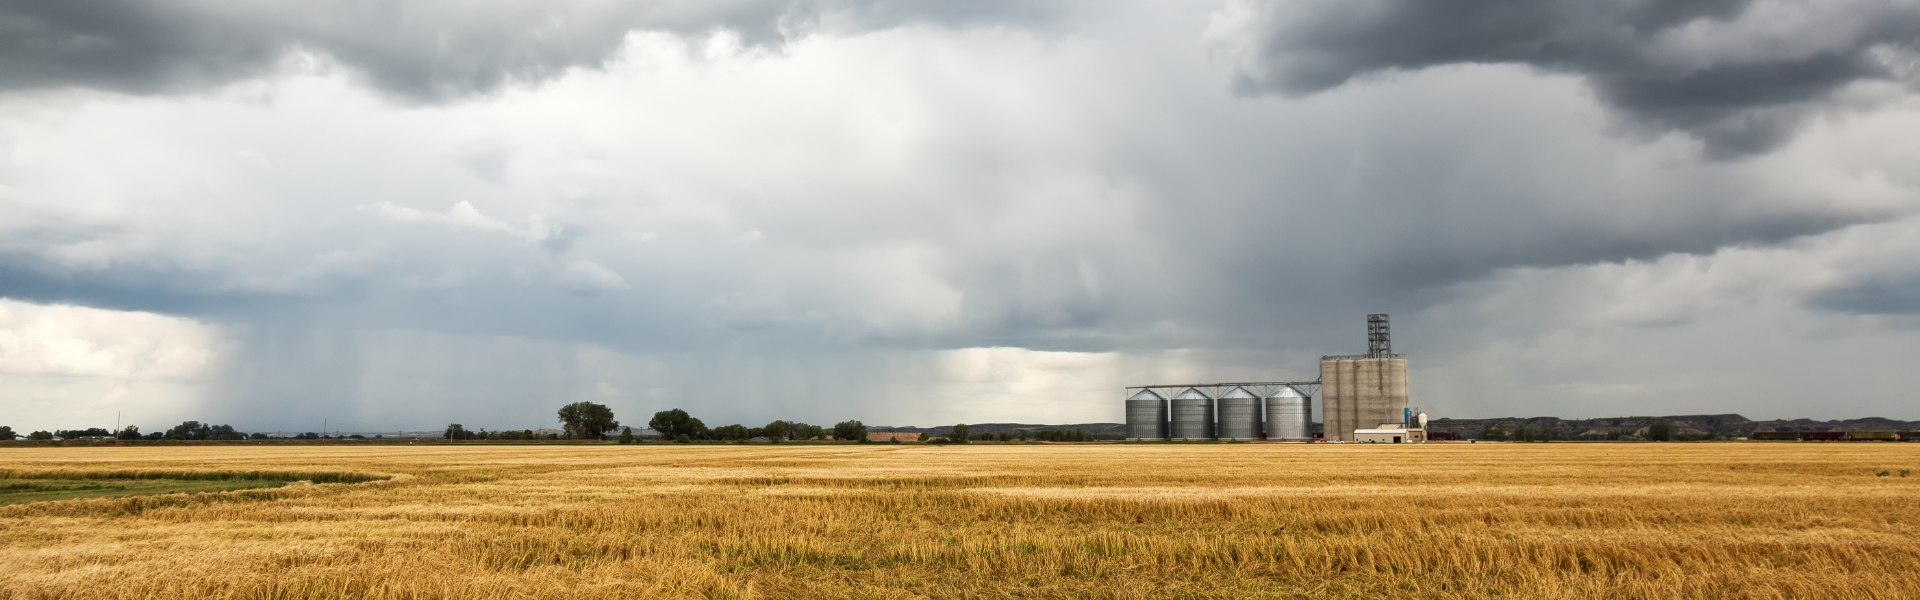 Field with Silos